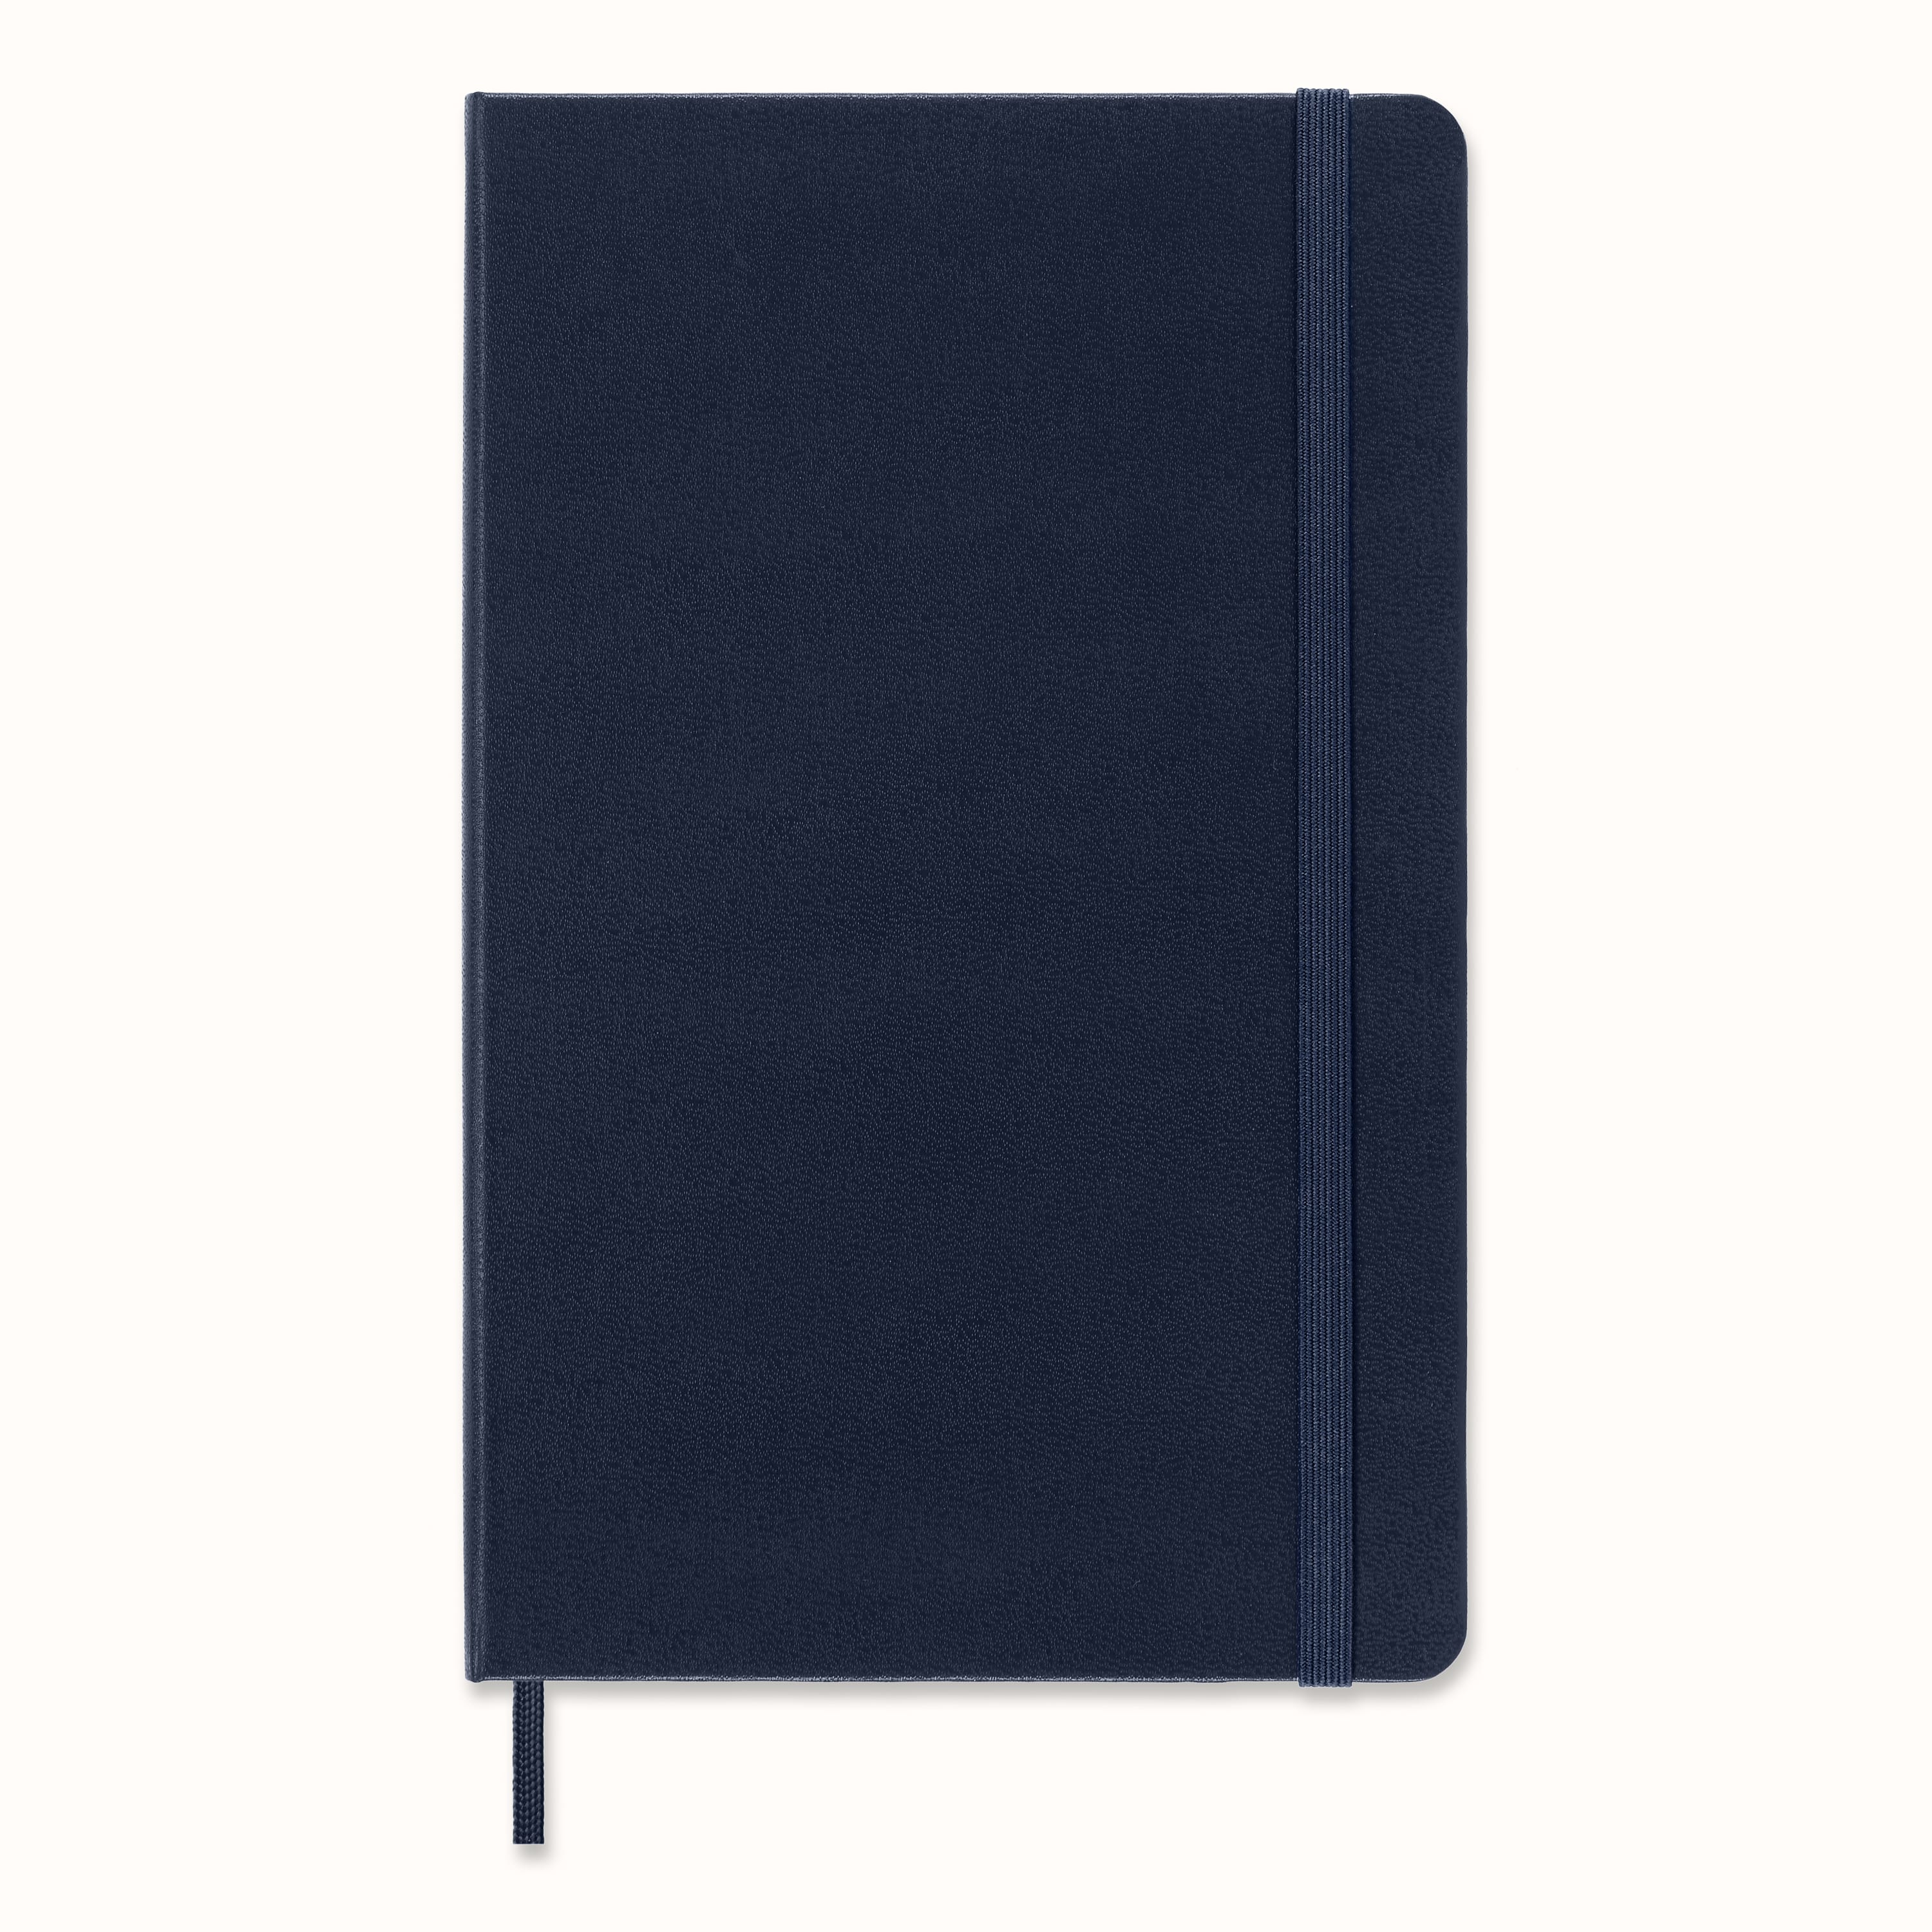 Moleskine Notebook Classic Pocket Sapphire Blue Soft Cover - Lined